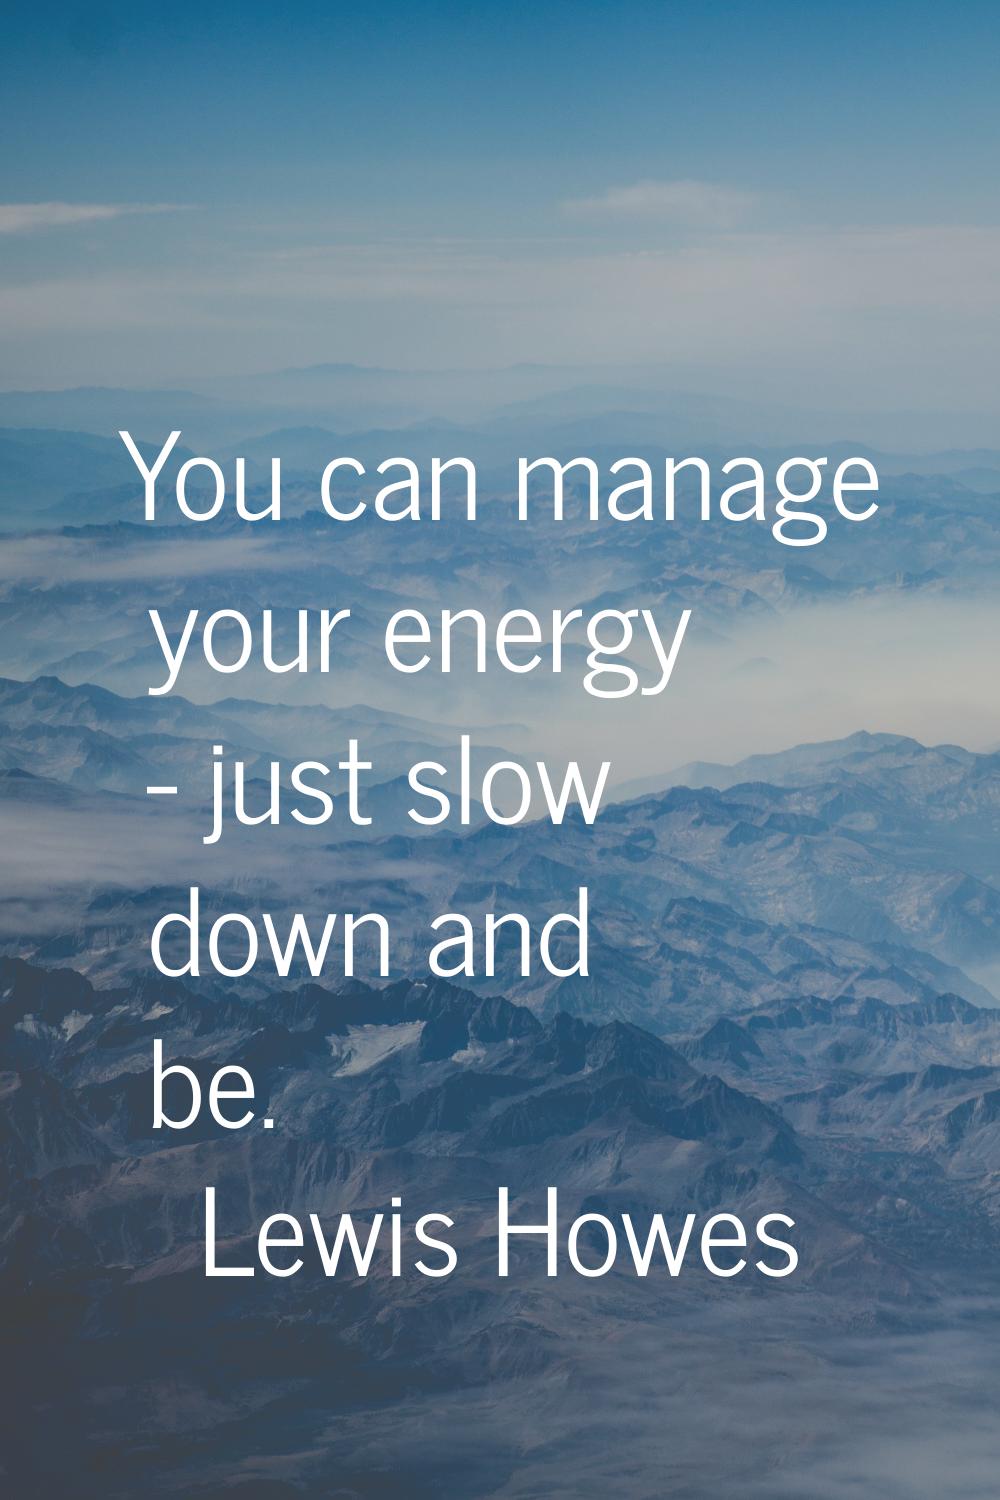 You can manage your energy - just slow down and be.